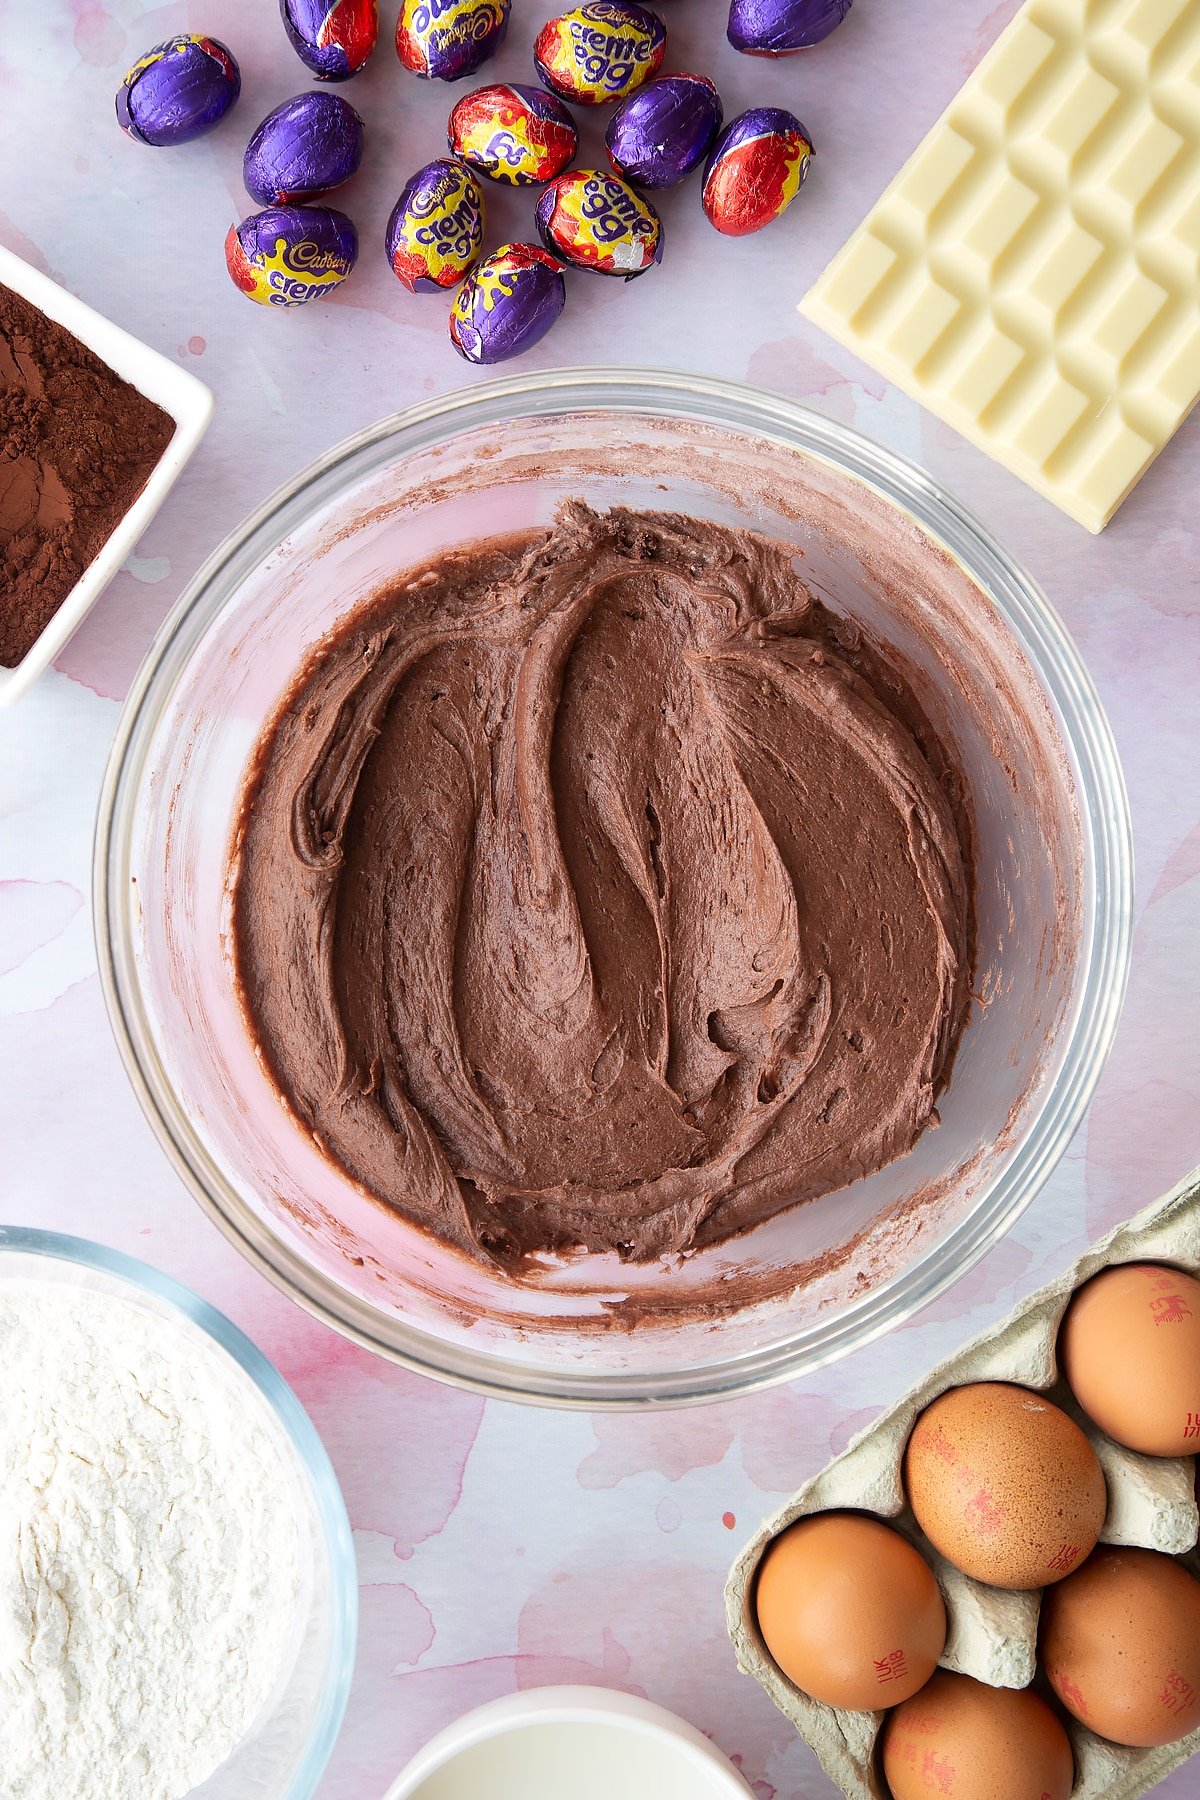 Thick chocolate cake batter in a bowl. Ingredients to make Cadbury Creme Egg cakes surround the bowl.